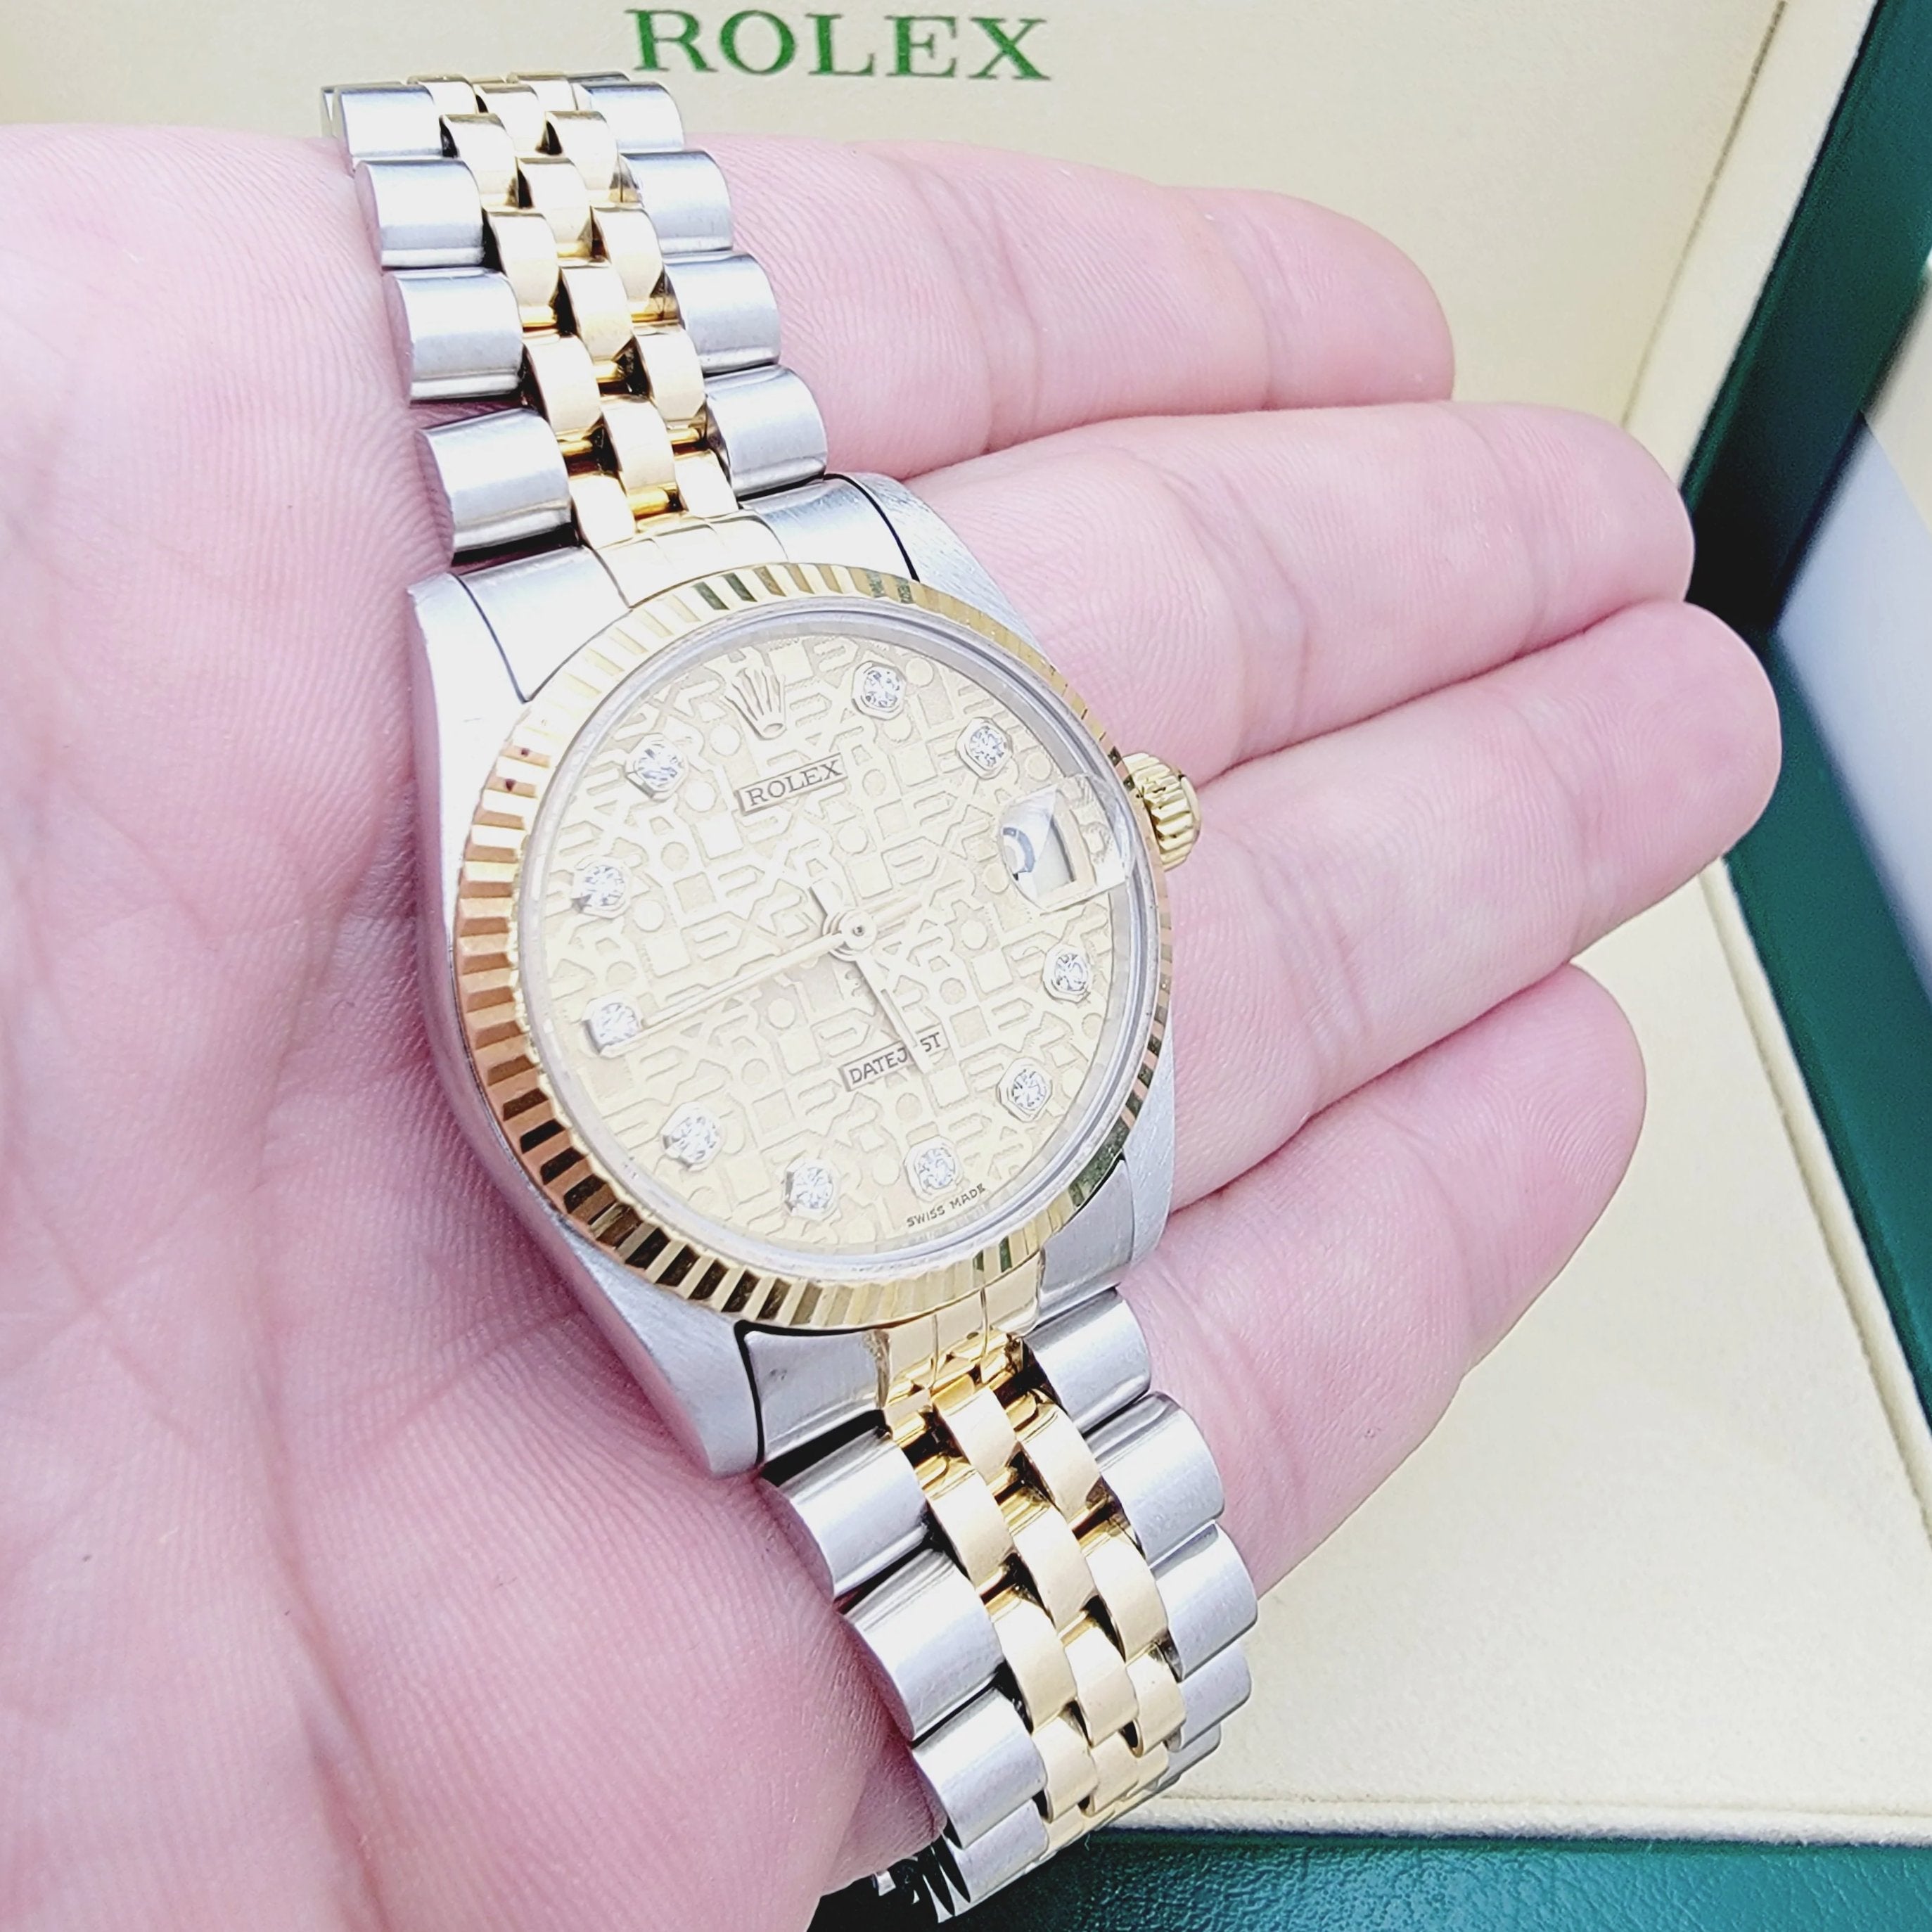 Ladies Rolex Midsize 31mm DateJust Two Tone 18K Yellow Gold / Stainless Steel Watch with Hologram Diamond Dial and Fluted Bezel. (Pre-Owned 68273)